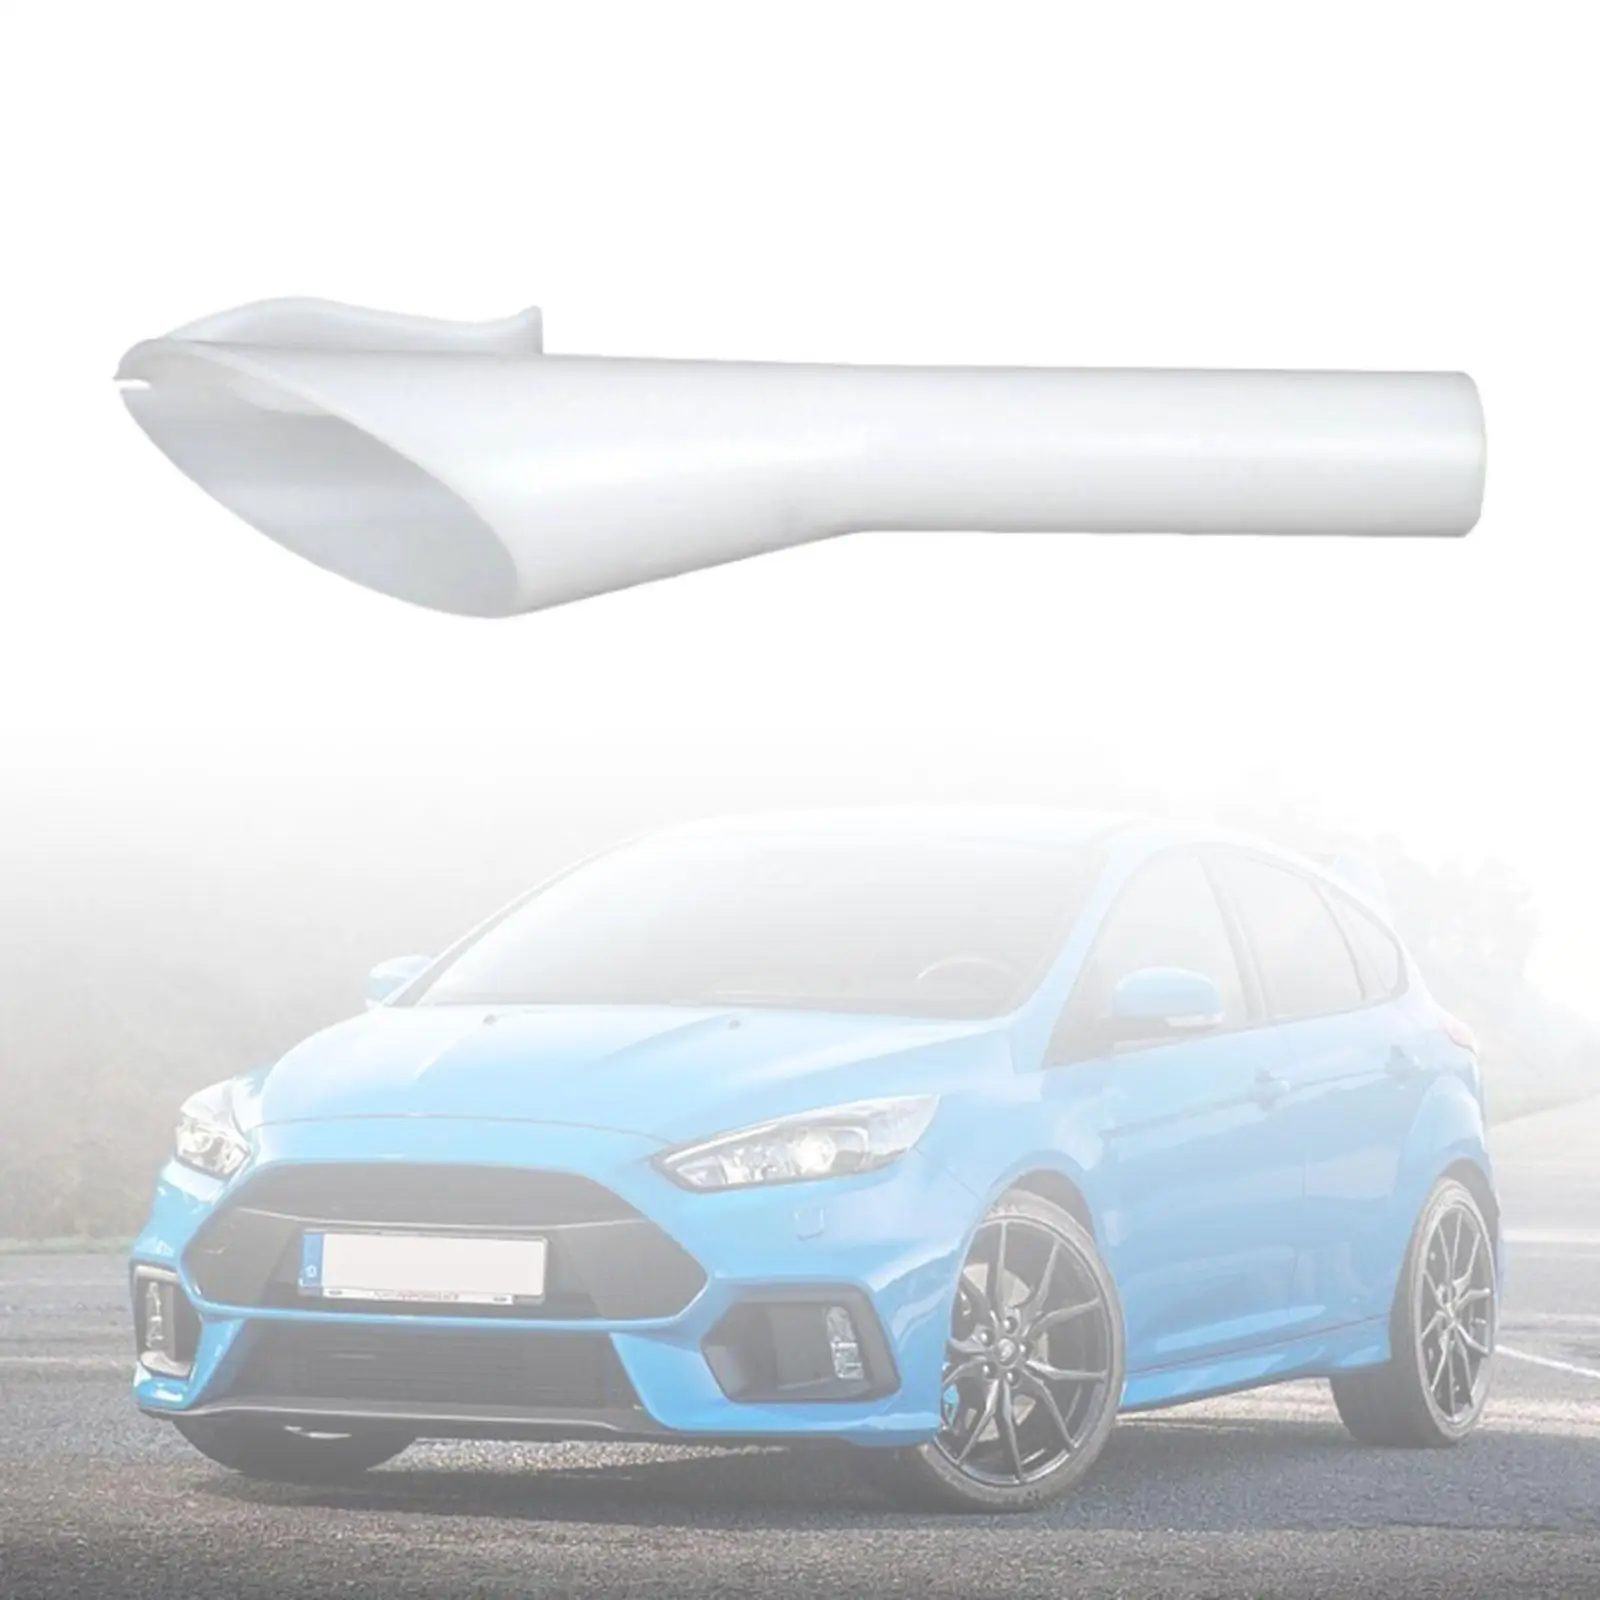 Oil Funnel Car Accessories Convenient Installation Fuel Tank Filler Neck Sleeve for Ford Kuga Fiesta Focus C Max B Max